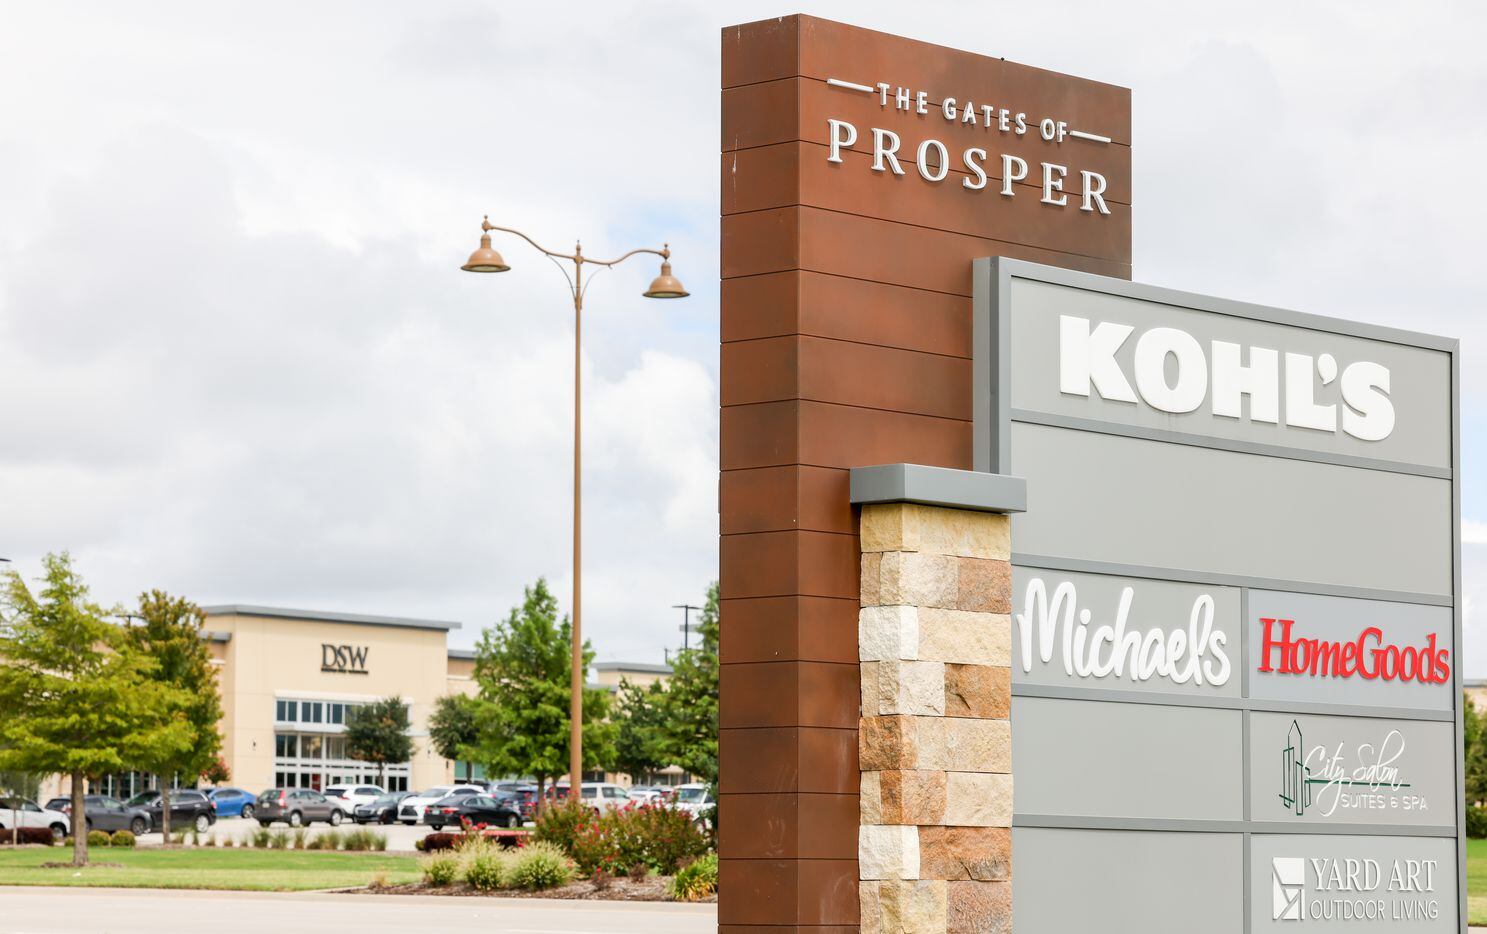 Entrance signs to The Gates of Prosper shopping center.